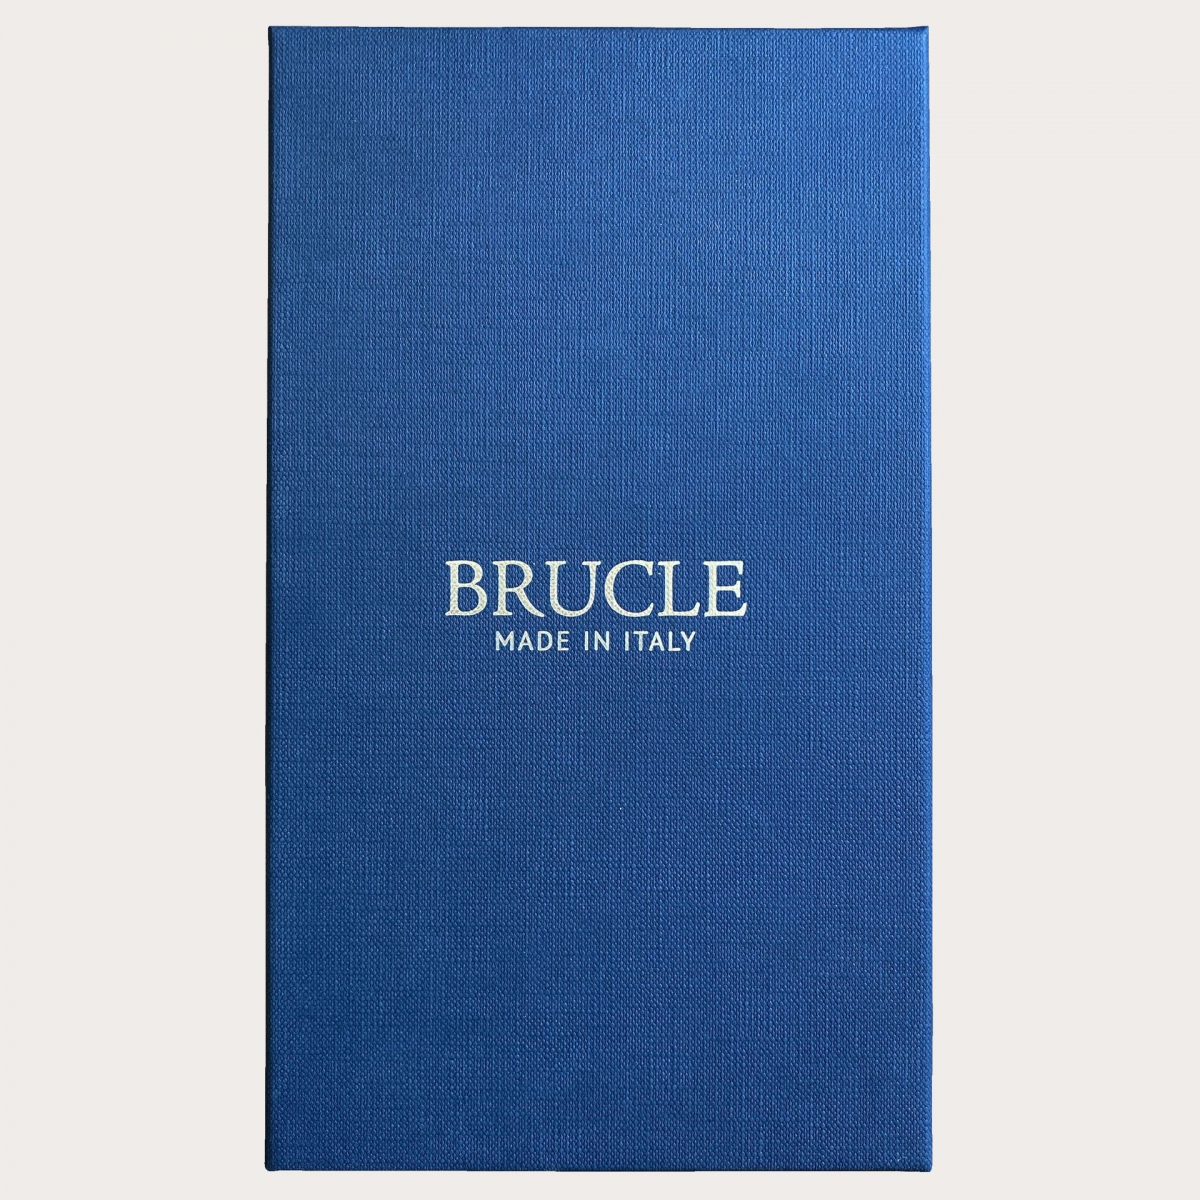 BRUCLE Y-shape blue elastic suspenders with red dotted pattern